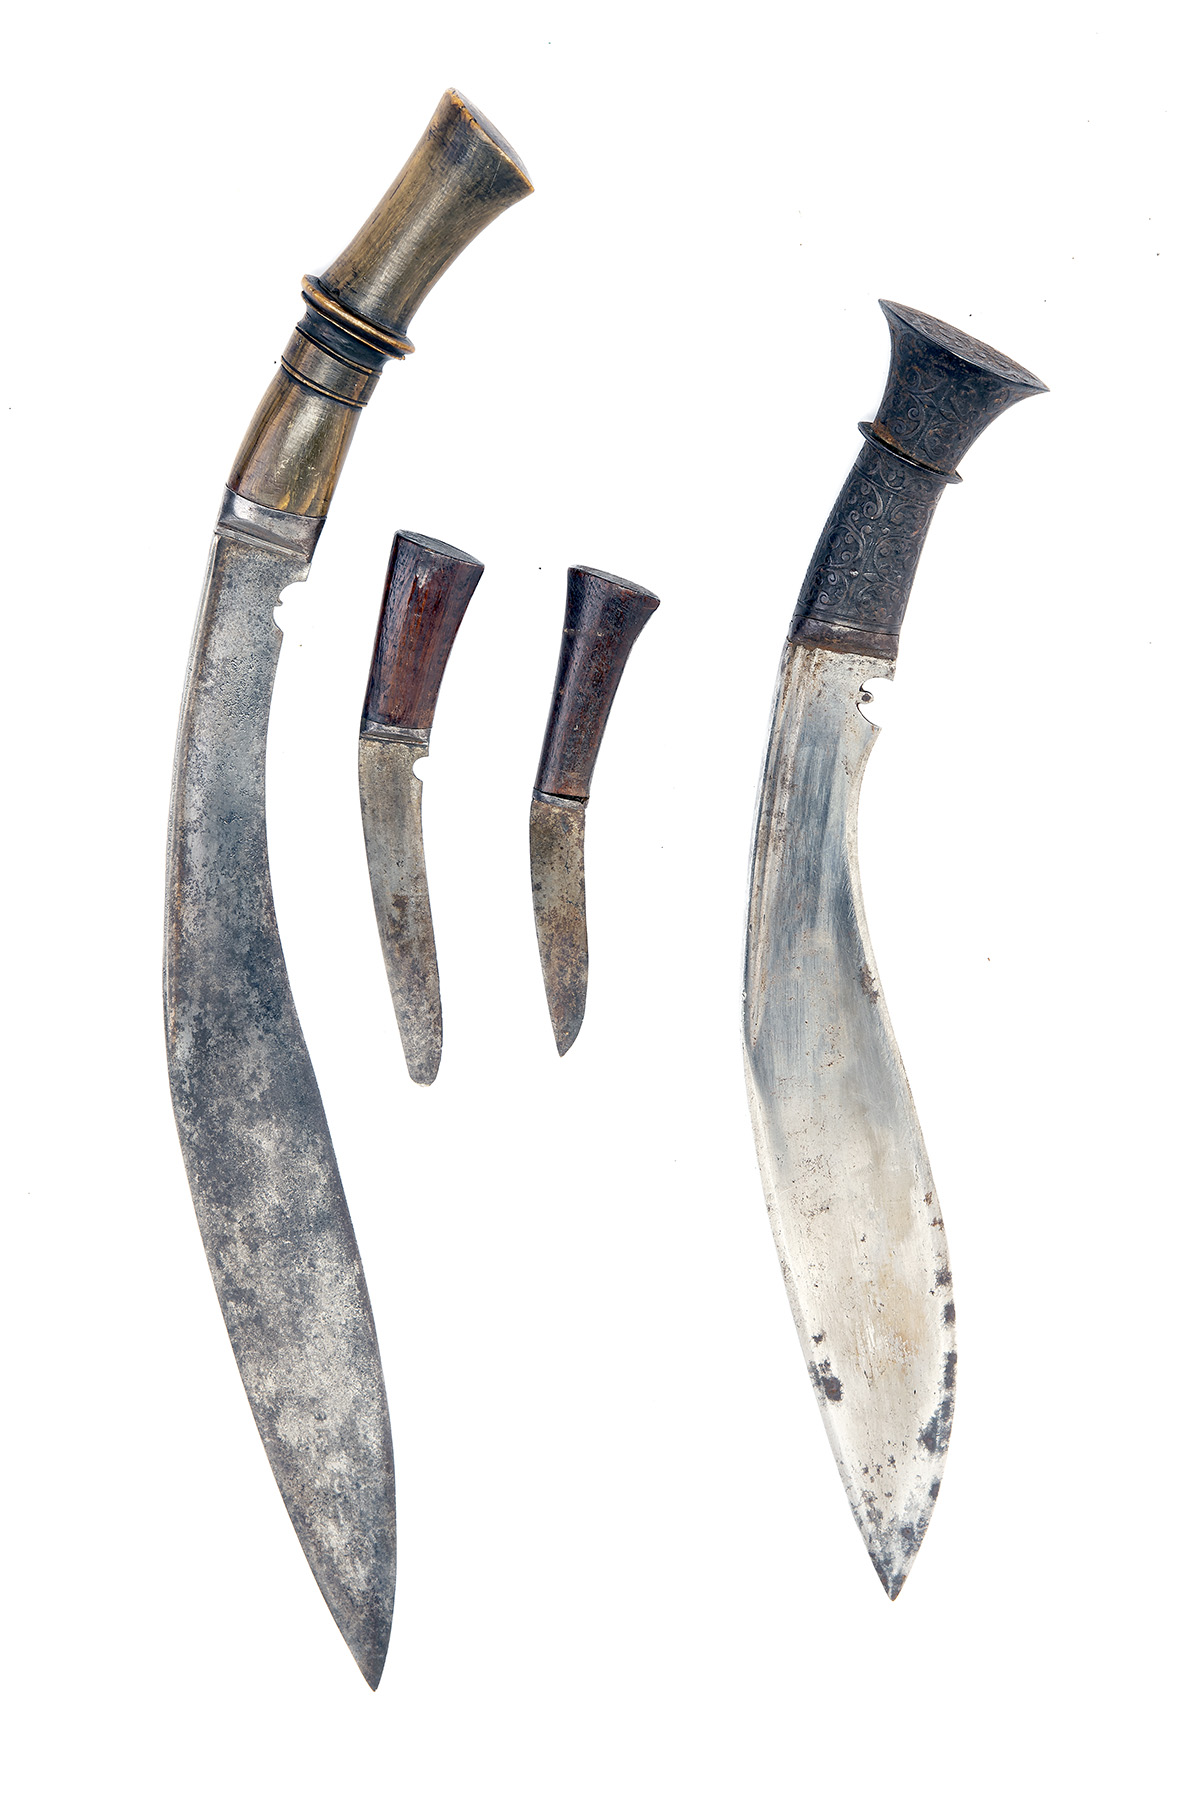 TWO LATE VICTORIAN KUKRI KNIVES, both circa 1890 and Northern Indian or Nepalese, the first with - Image 2 of 2